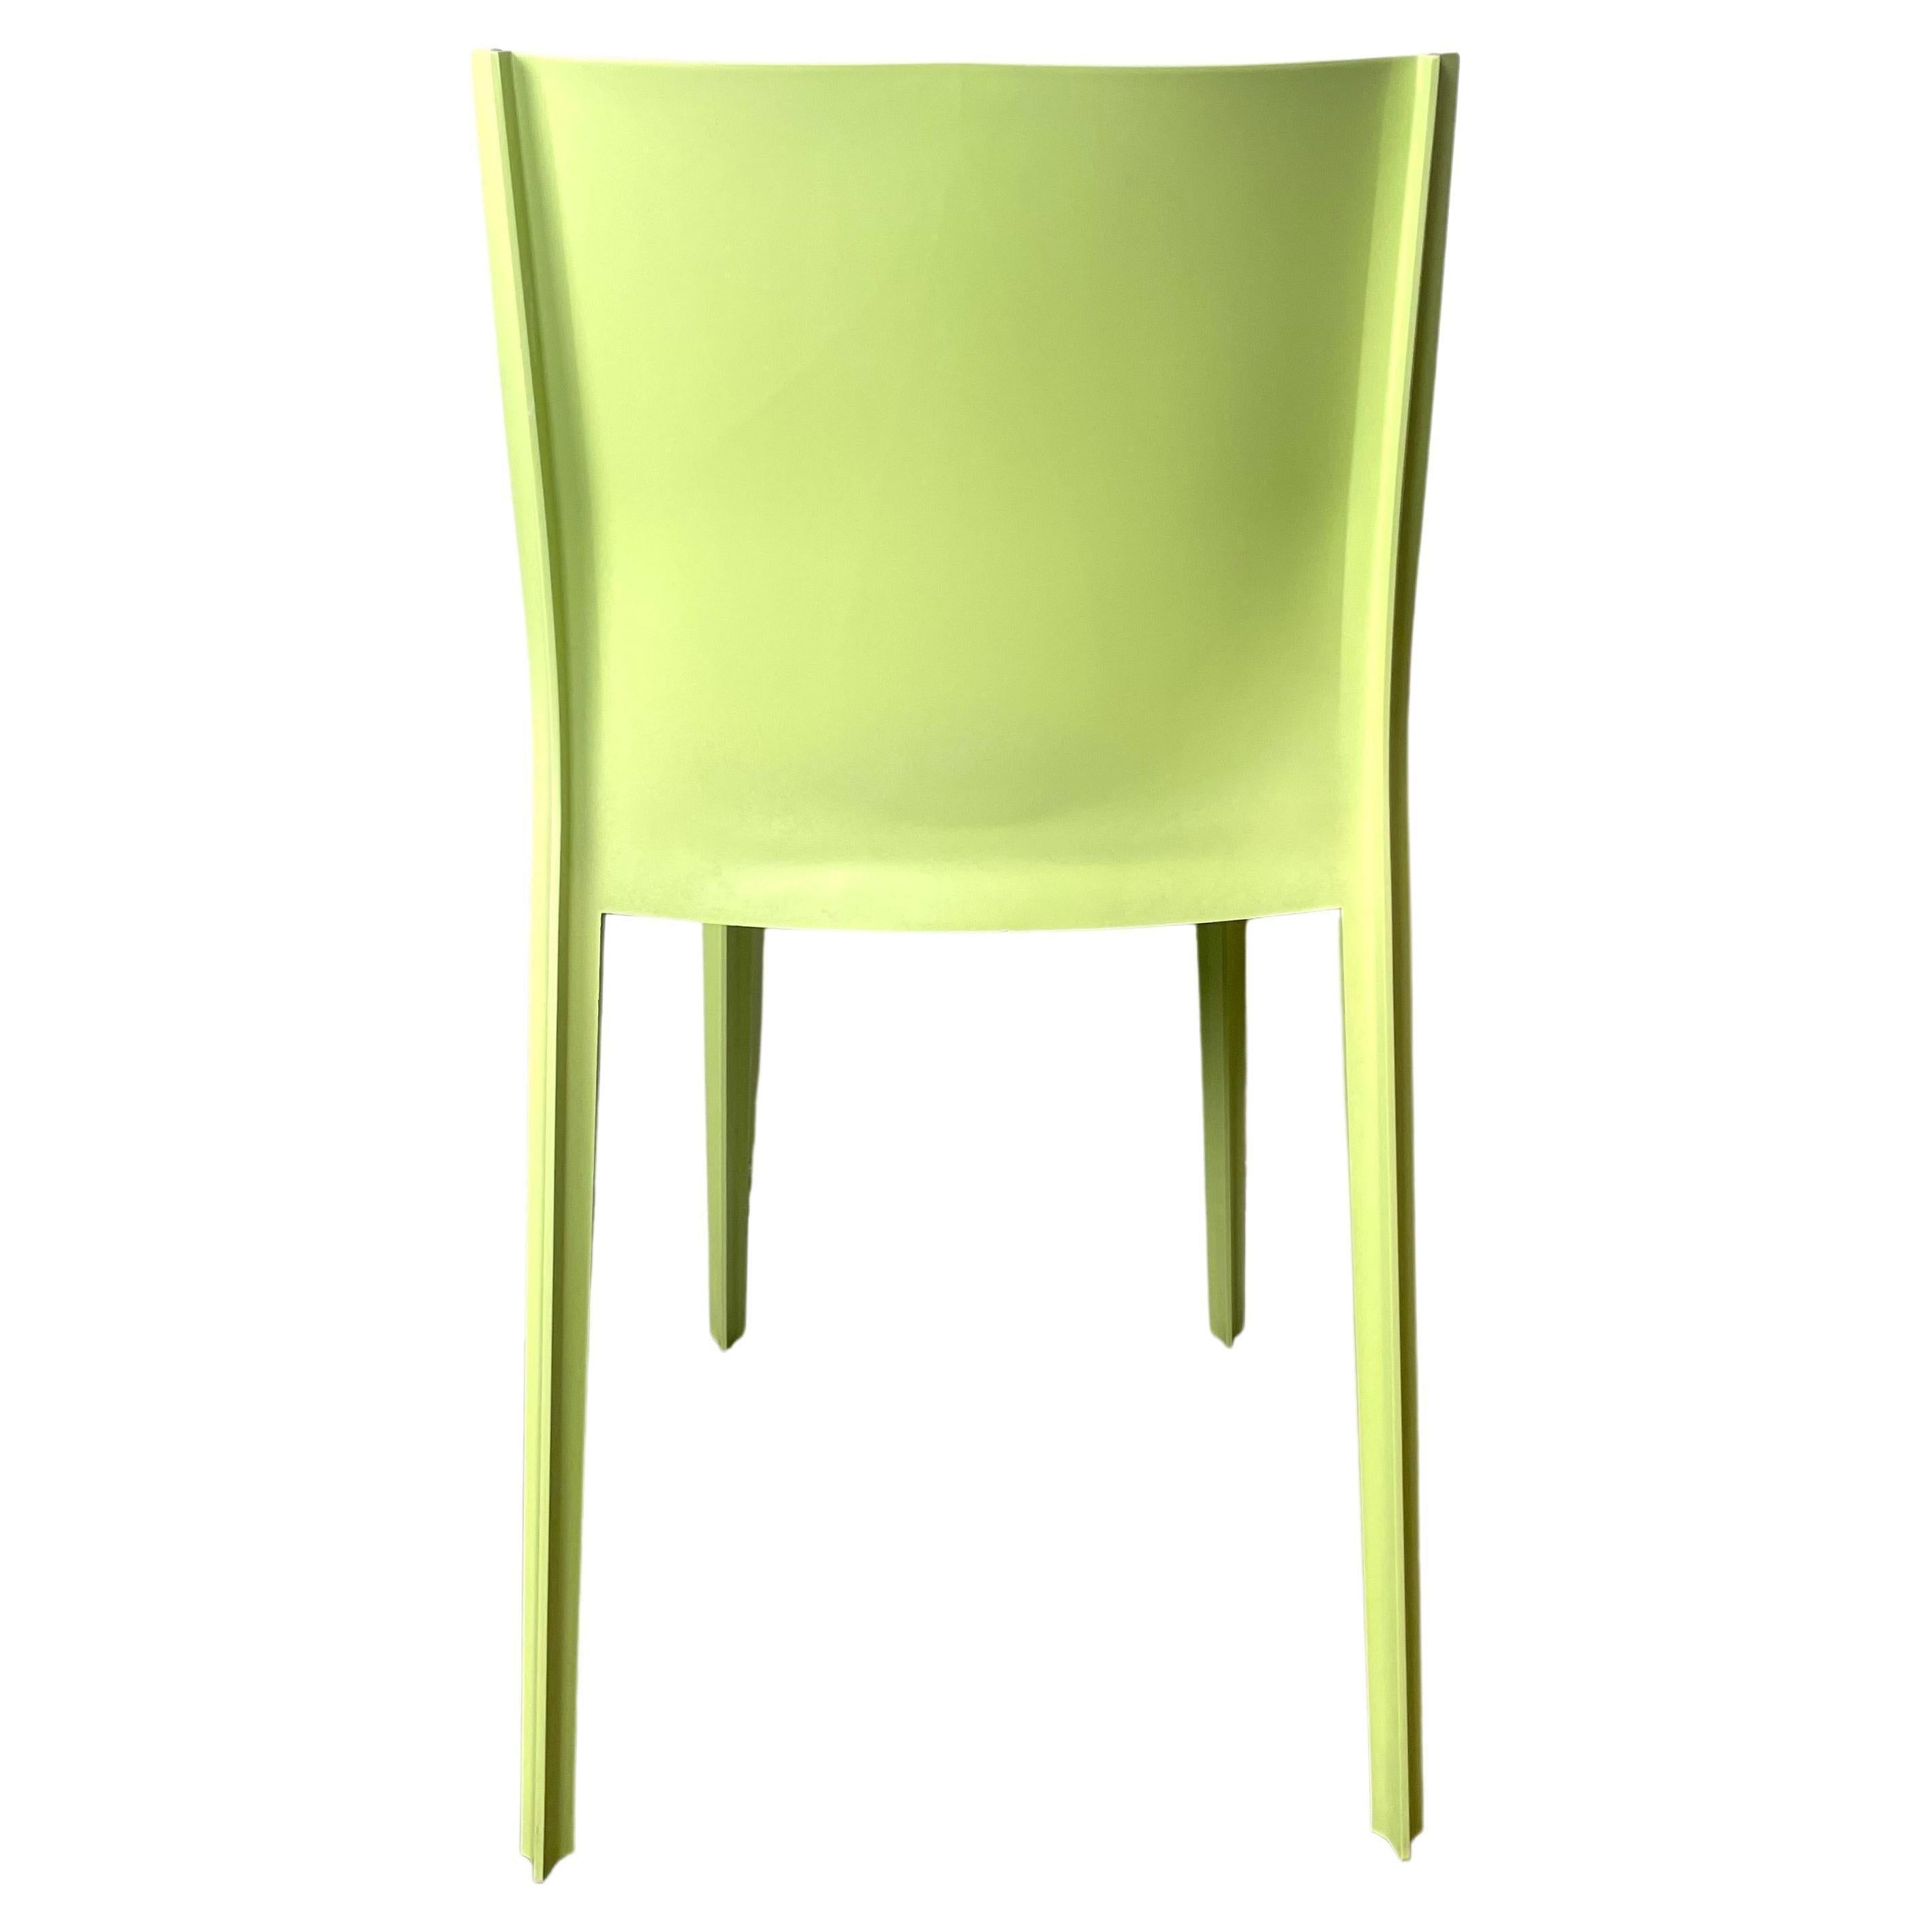 Philippe Starck, Set of 2 French Green Chairs, Design Slick Slick XO - France For Sale 1